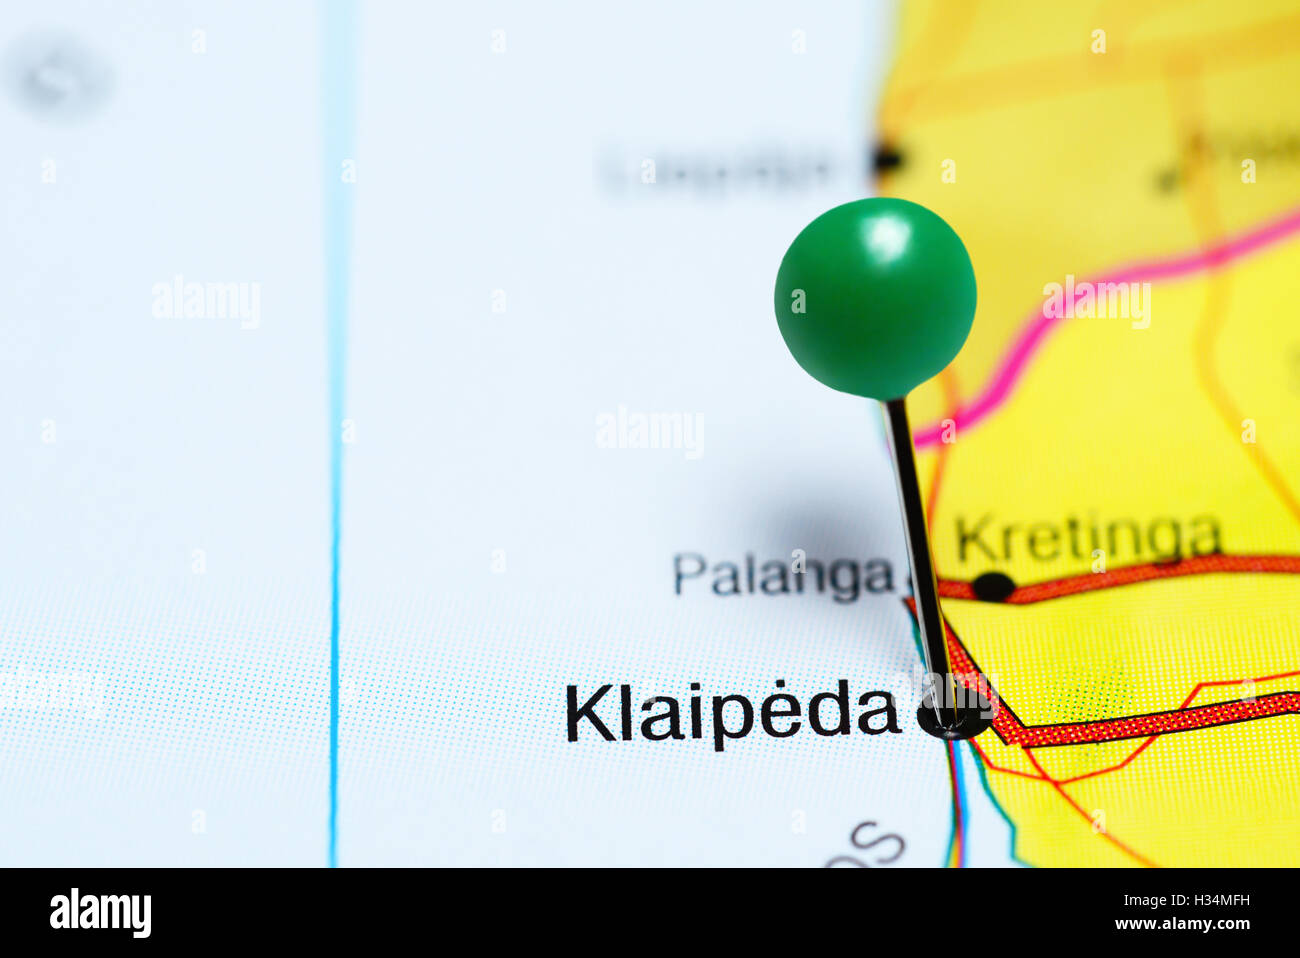 Klaipeda pinned on a map of Lithuania Stock Photo